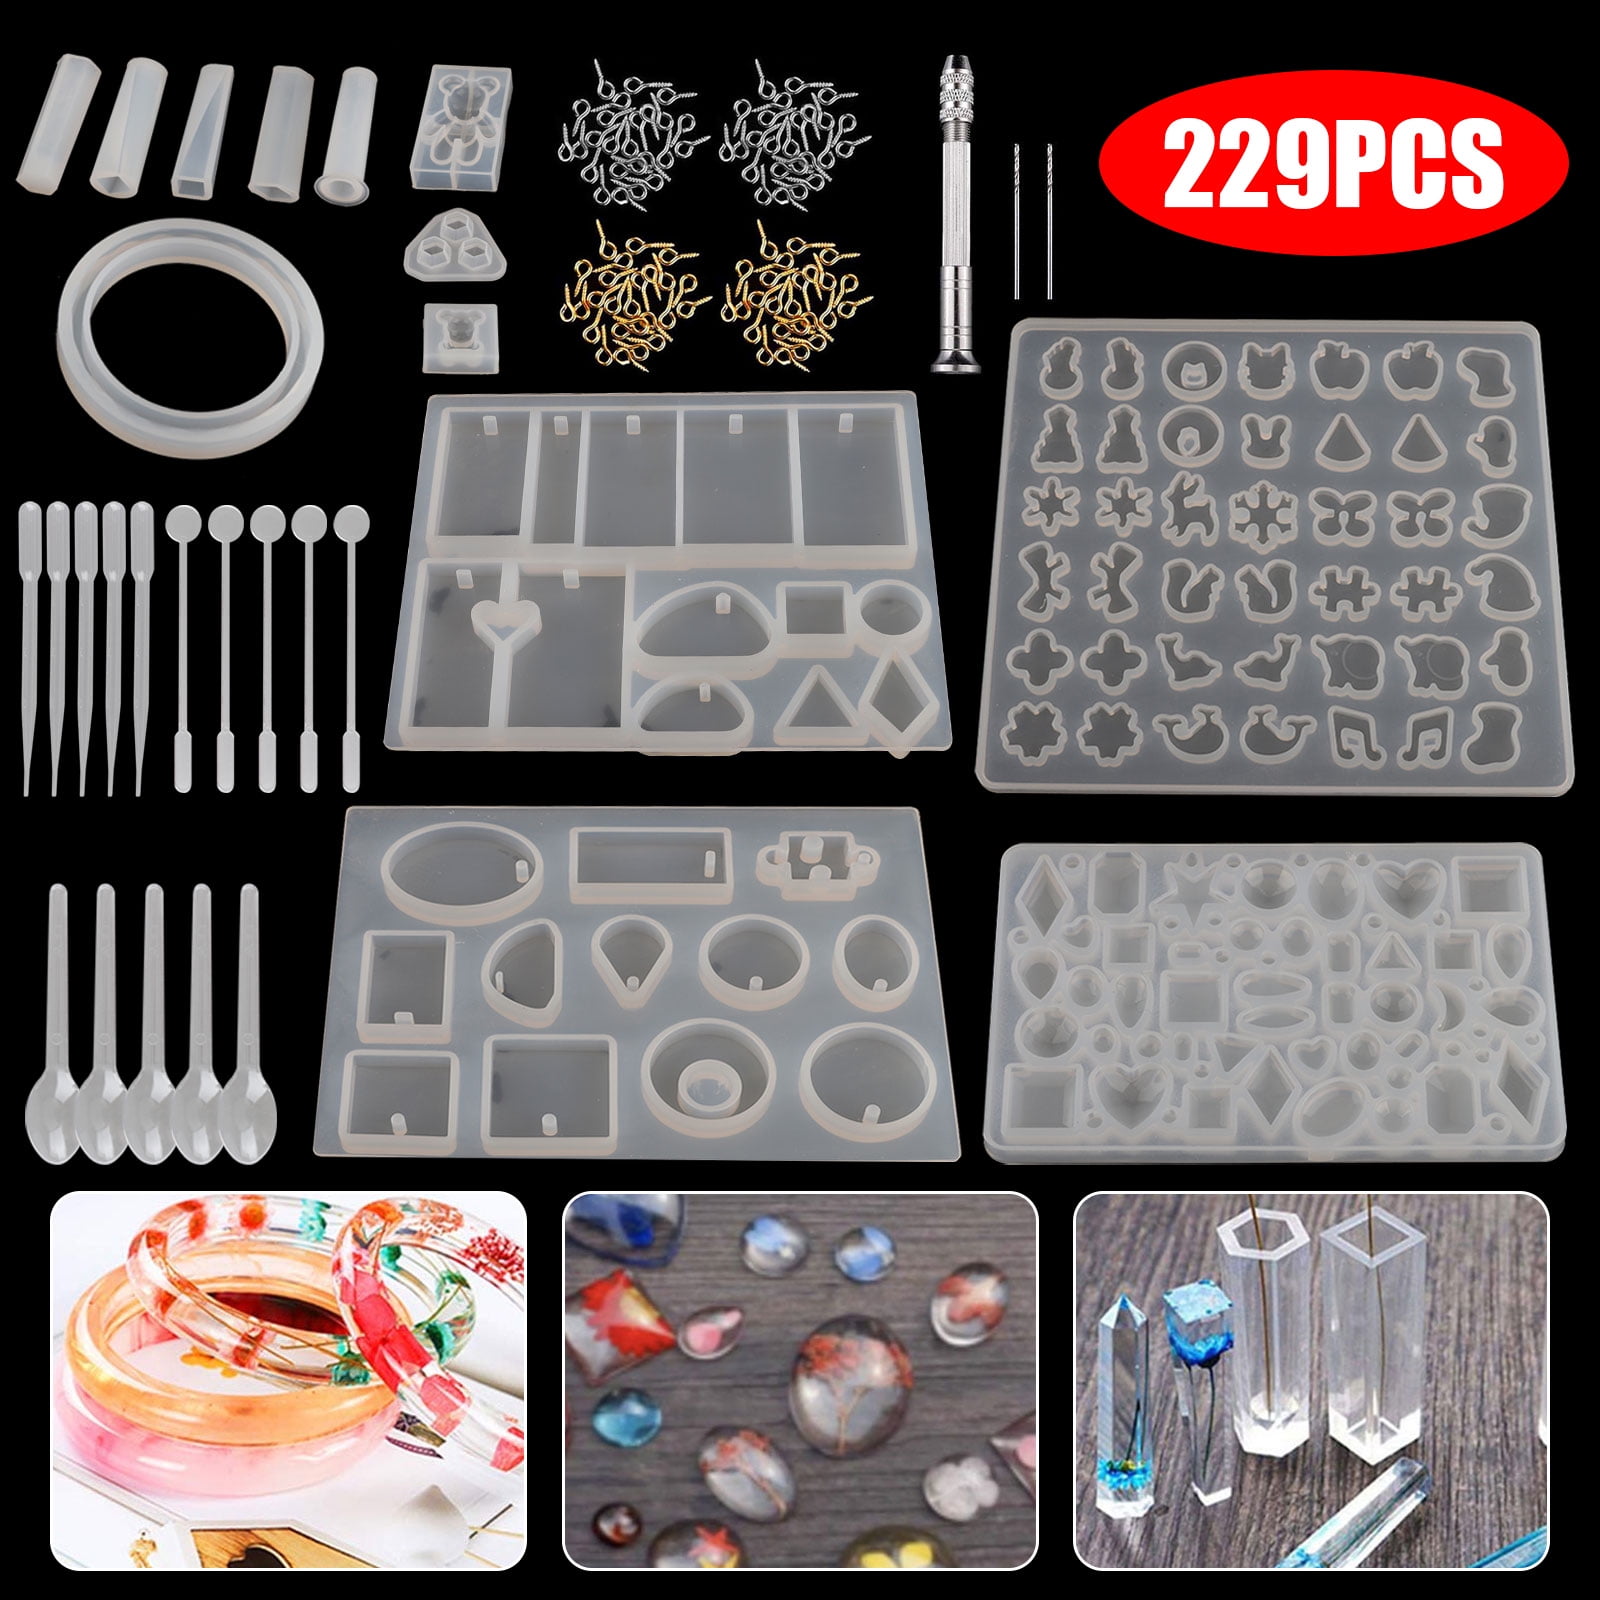 Wobe Silicone Jewelry Pendant Moulds 5pcs Spoons for Jewelry Craft Making Jewelry Casting Molds Set 5pcs Droppers 122 Pcs Resin Casting Molds and Tools Set 100pcs Screw Eye Pins 5pcs Stirrers